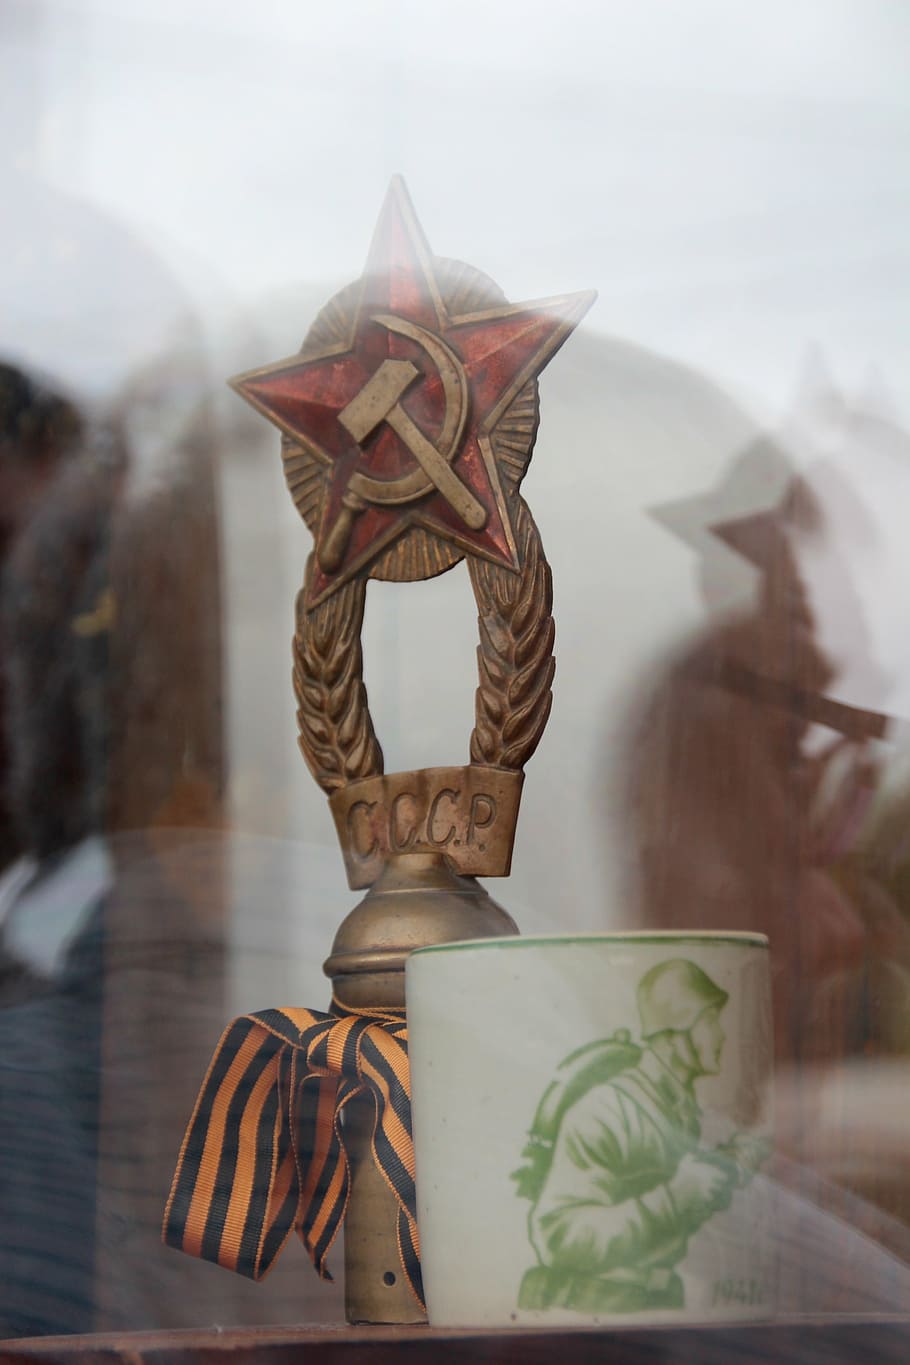 moscow, russia, soviet union, east, star, badge, hammer, sickle, focus on foreground, art and craft